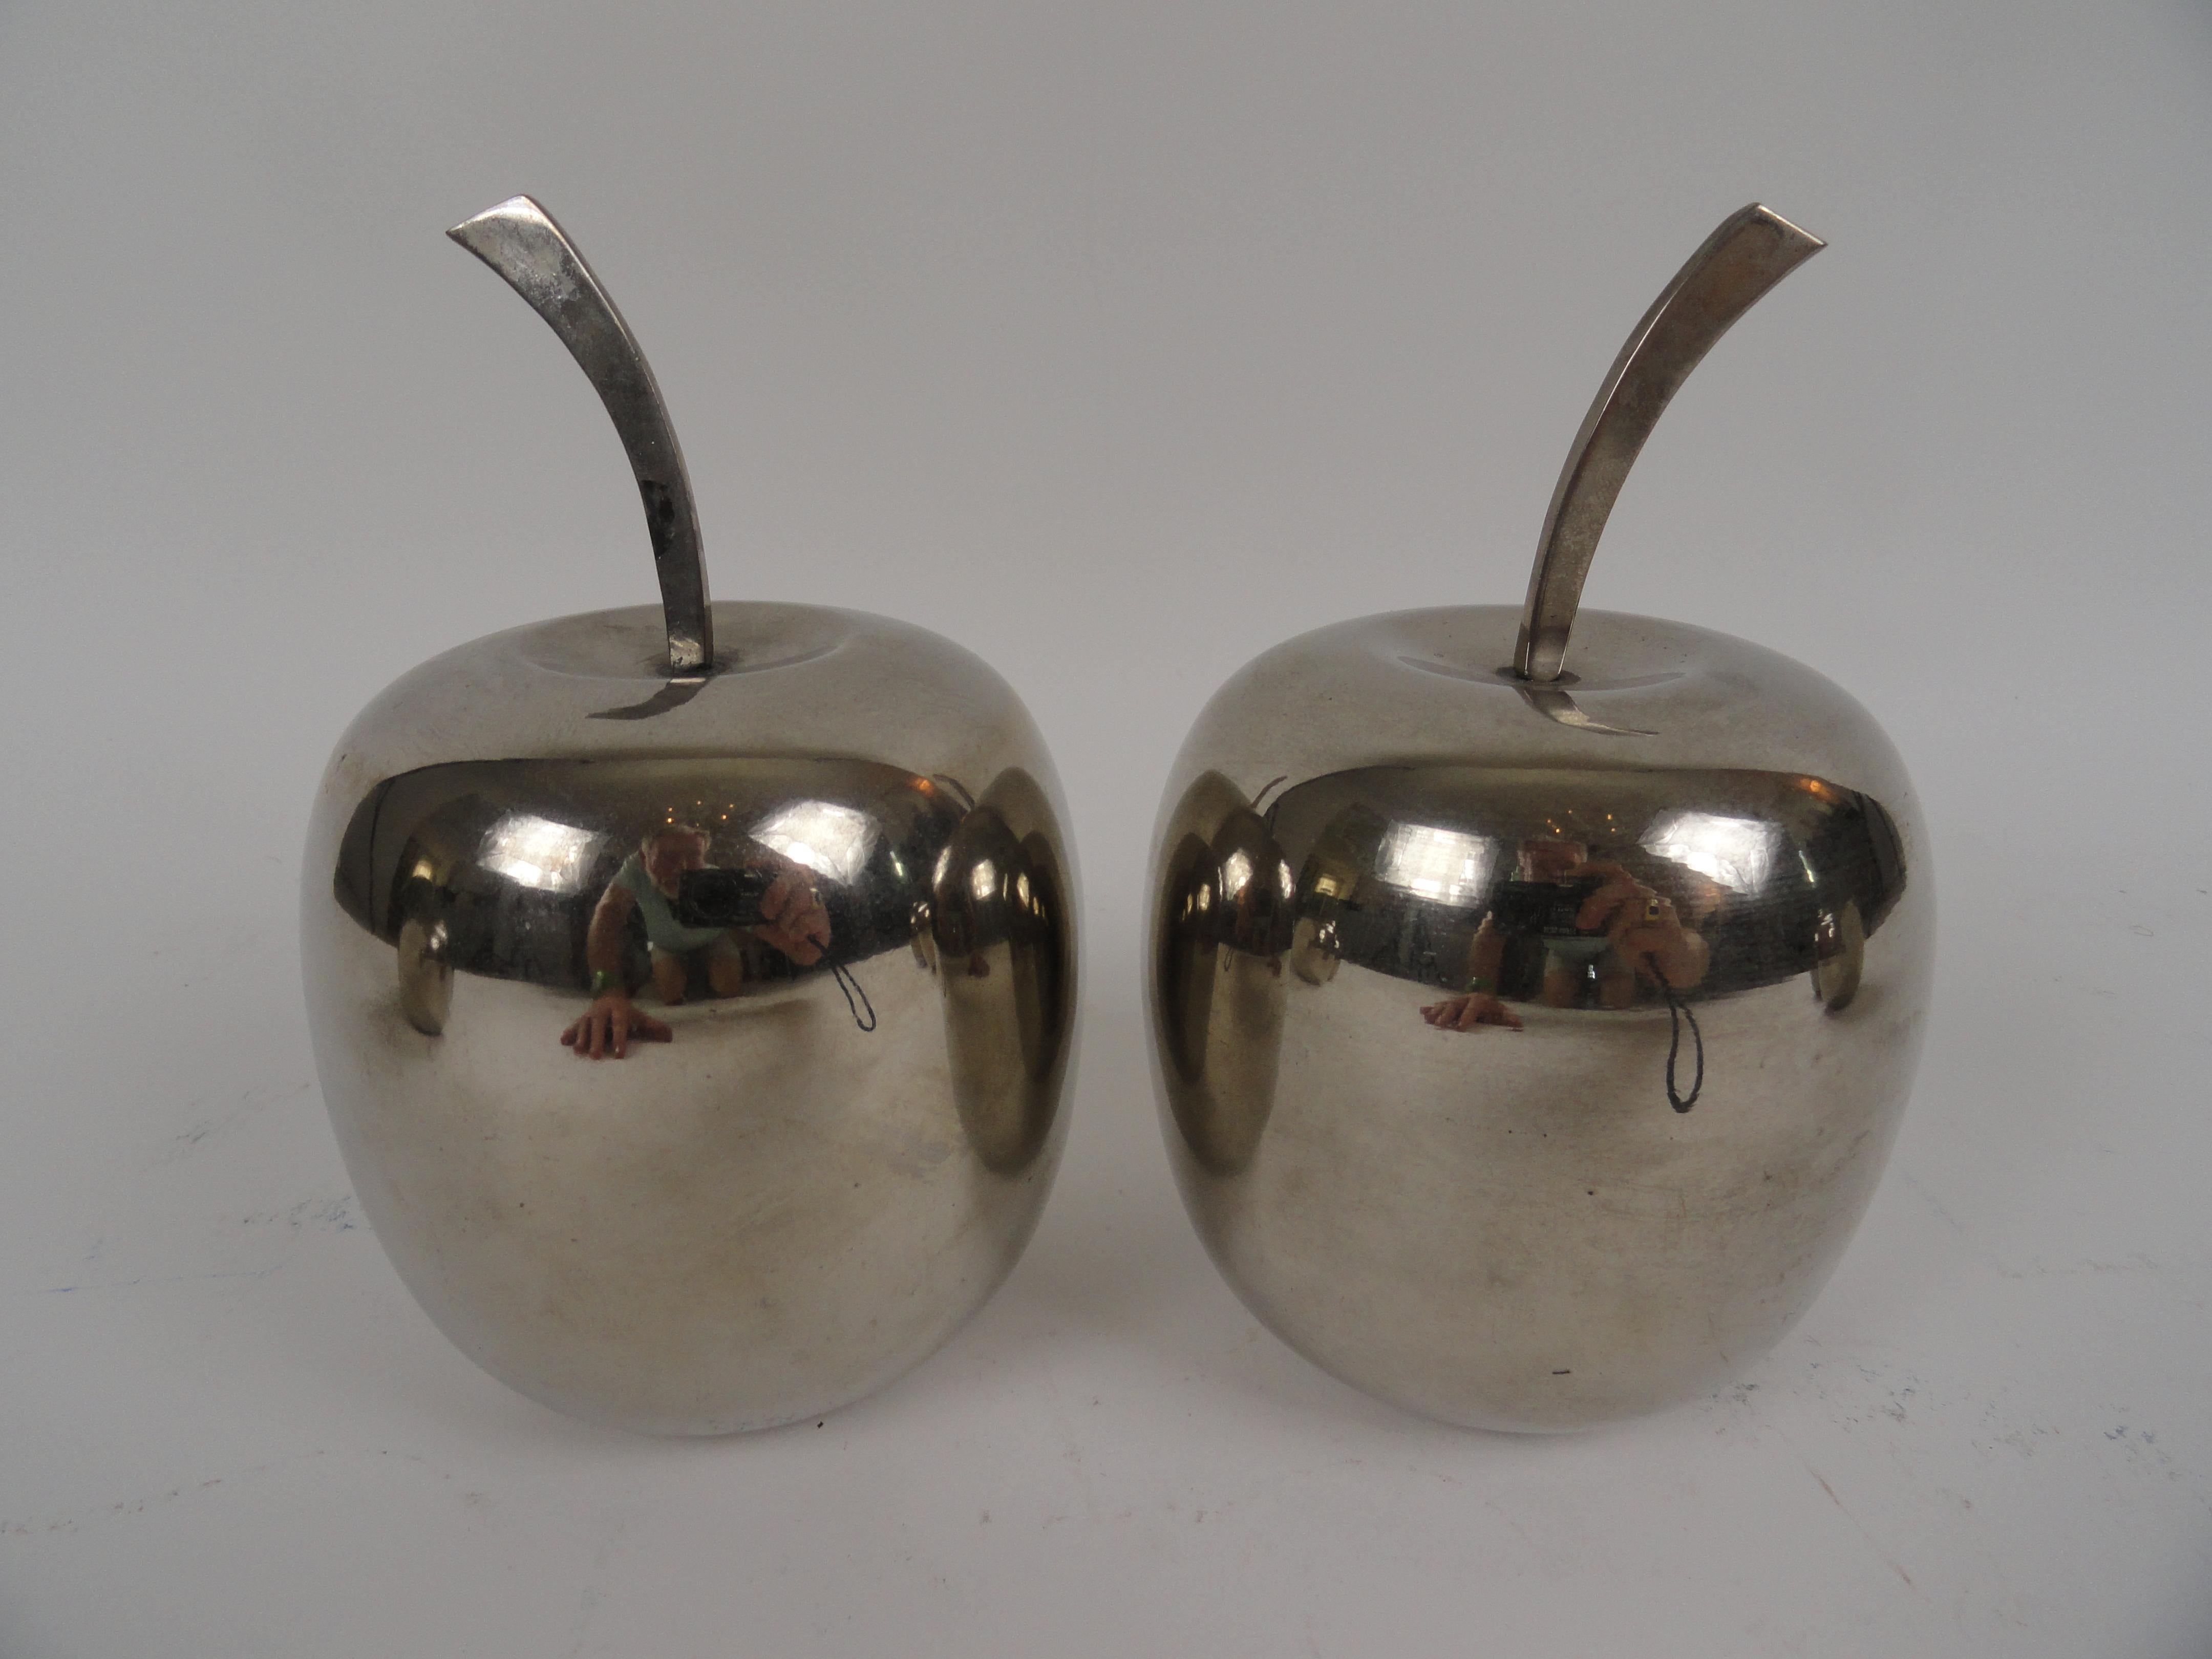 Six-piece collection of silver plated sculpture fruit. Two pears and four apples. All with stems.